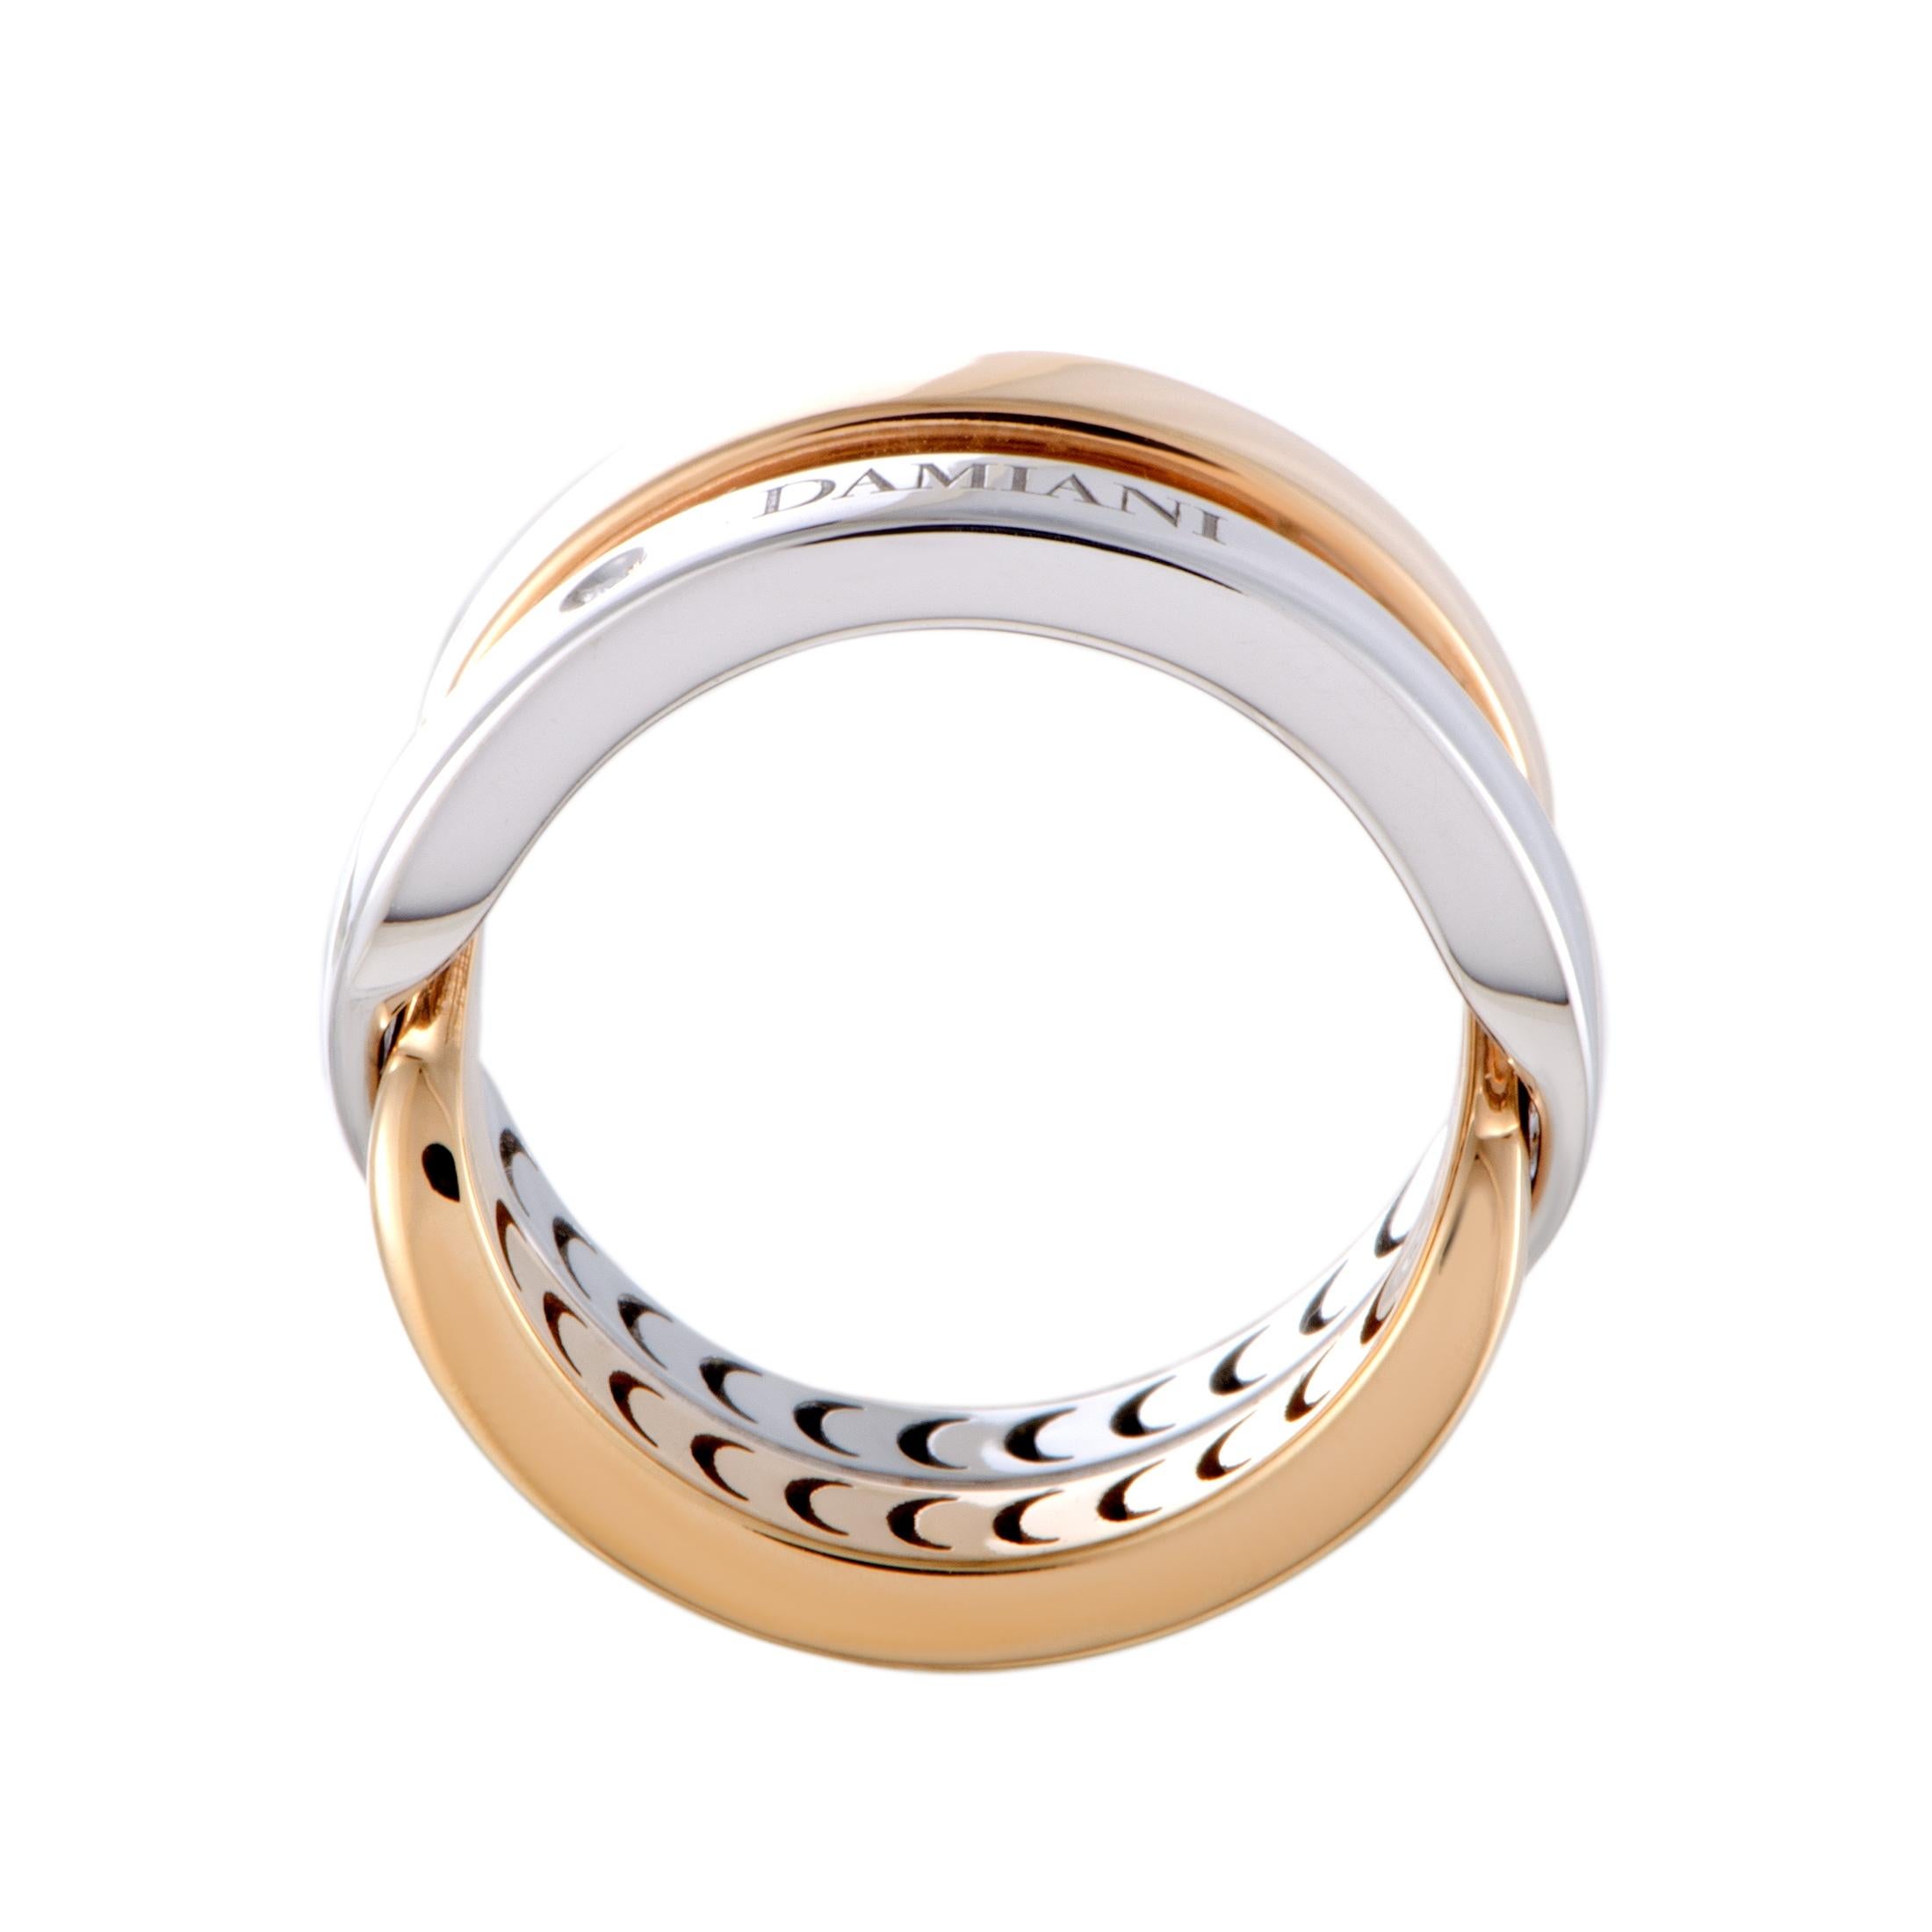 This sublime Damiani piece offers an exceptionally elegant appearance thanks to the splendidly understated design that is wonderfully accentuated by a stylish inscription of the brand’s name and by a single white diamond stone. The ring is